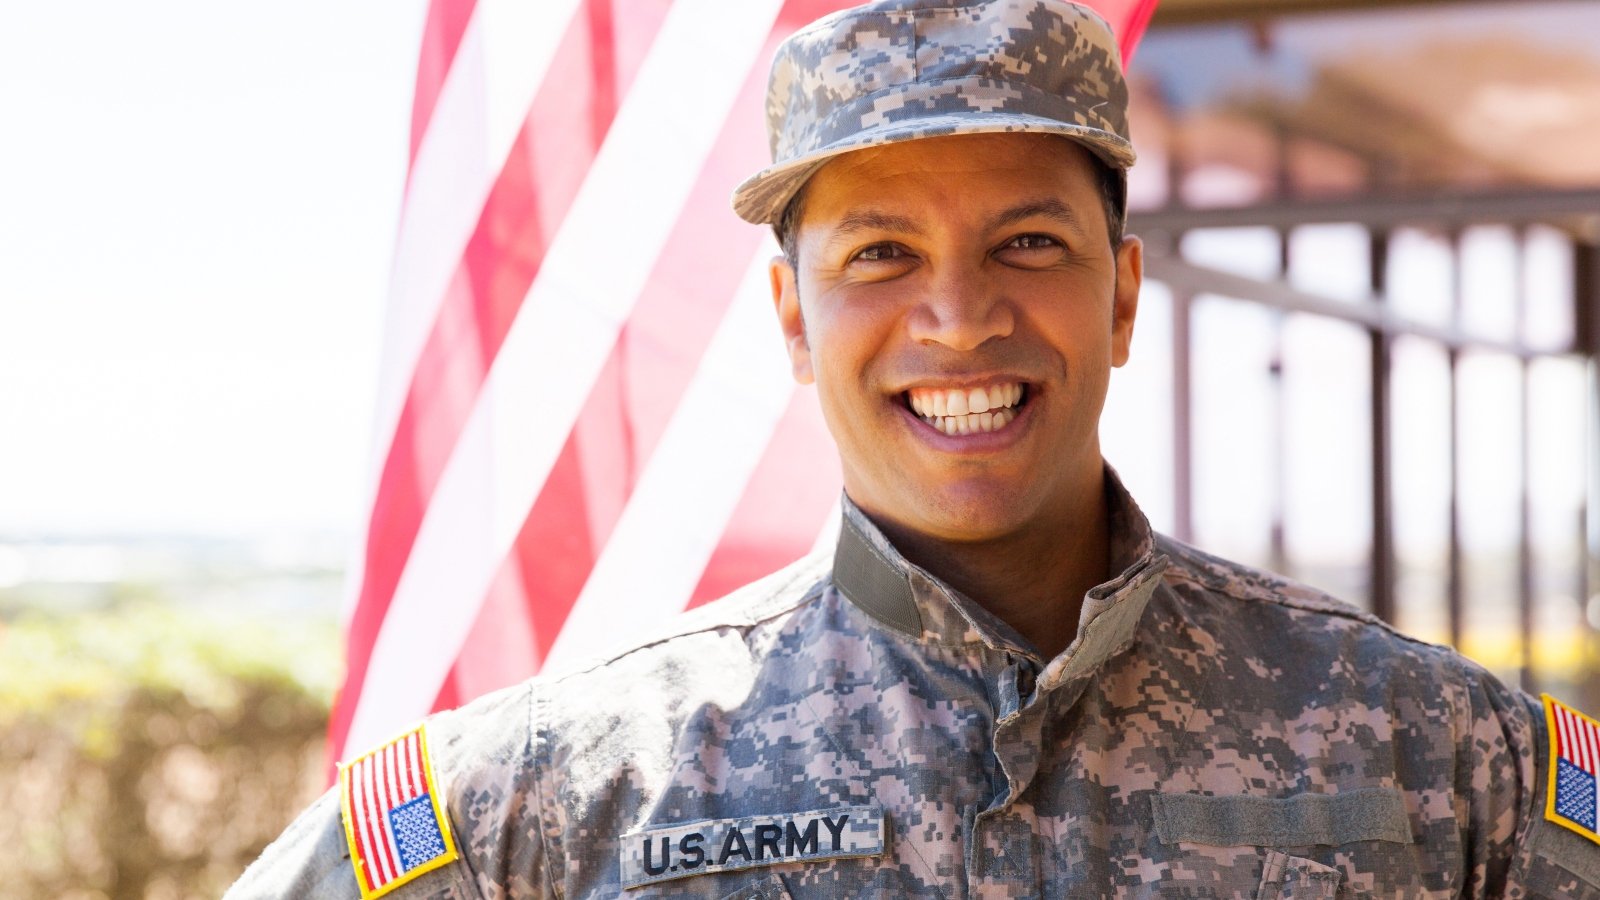 portrait of happy us army soldier outdoors